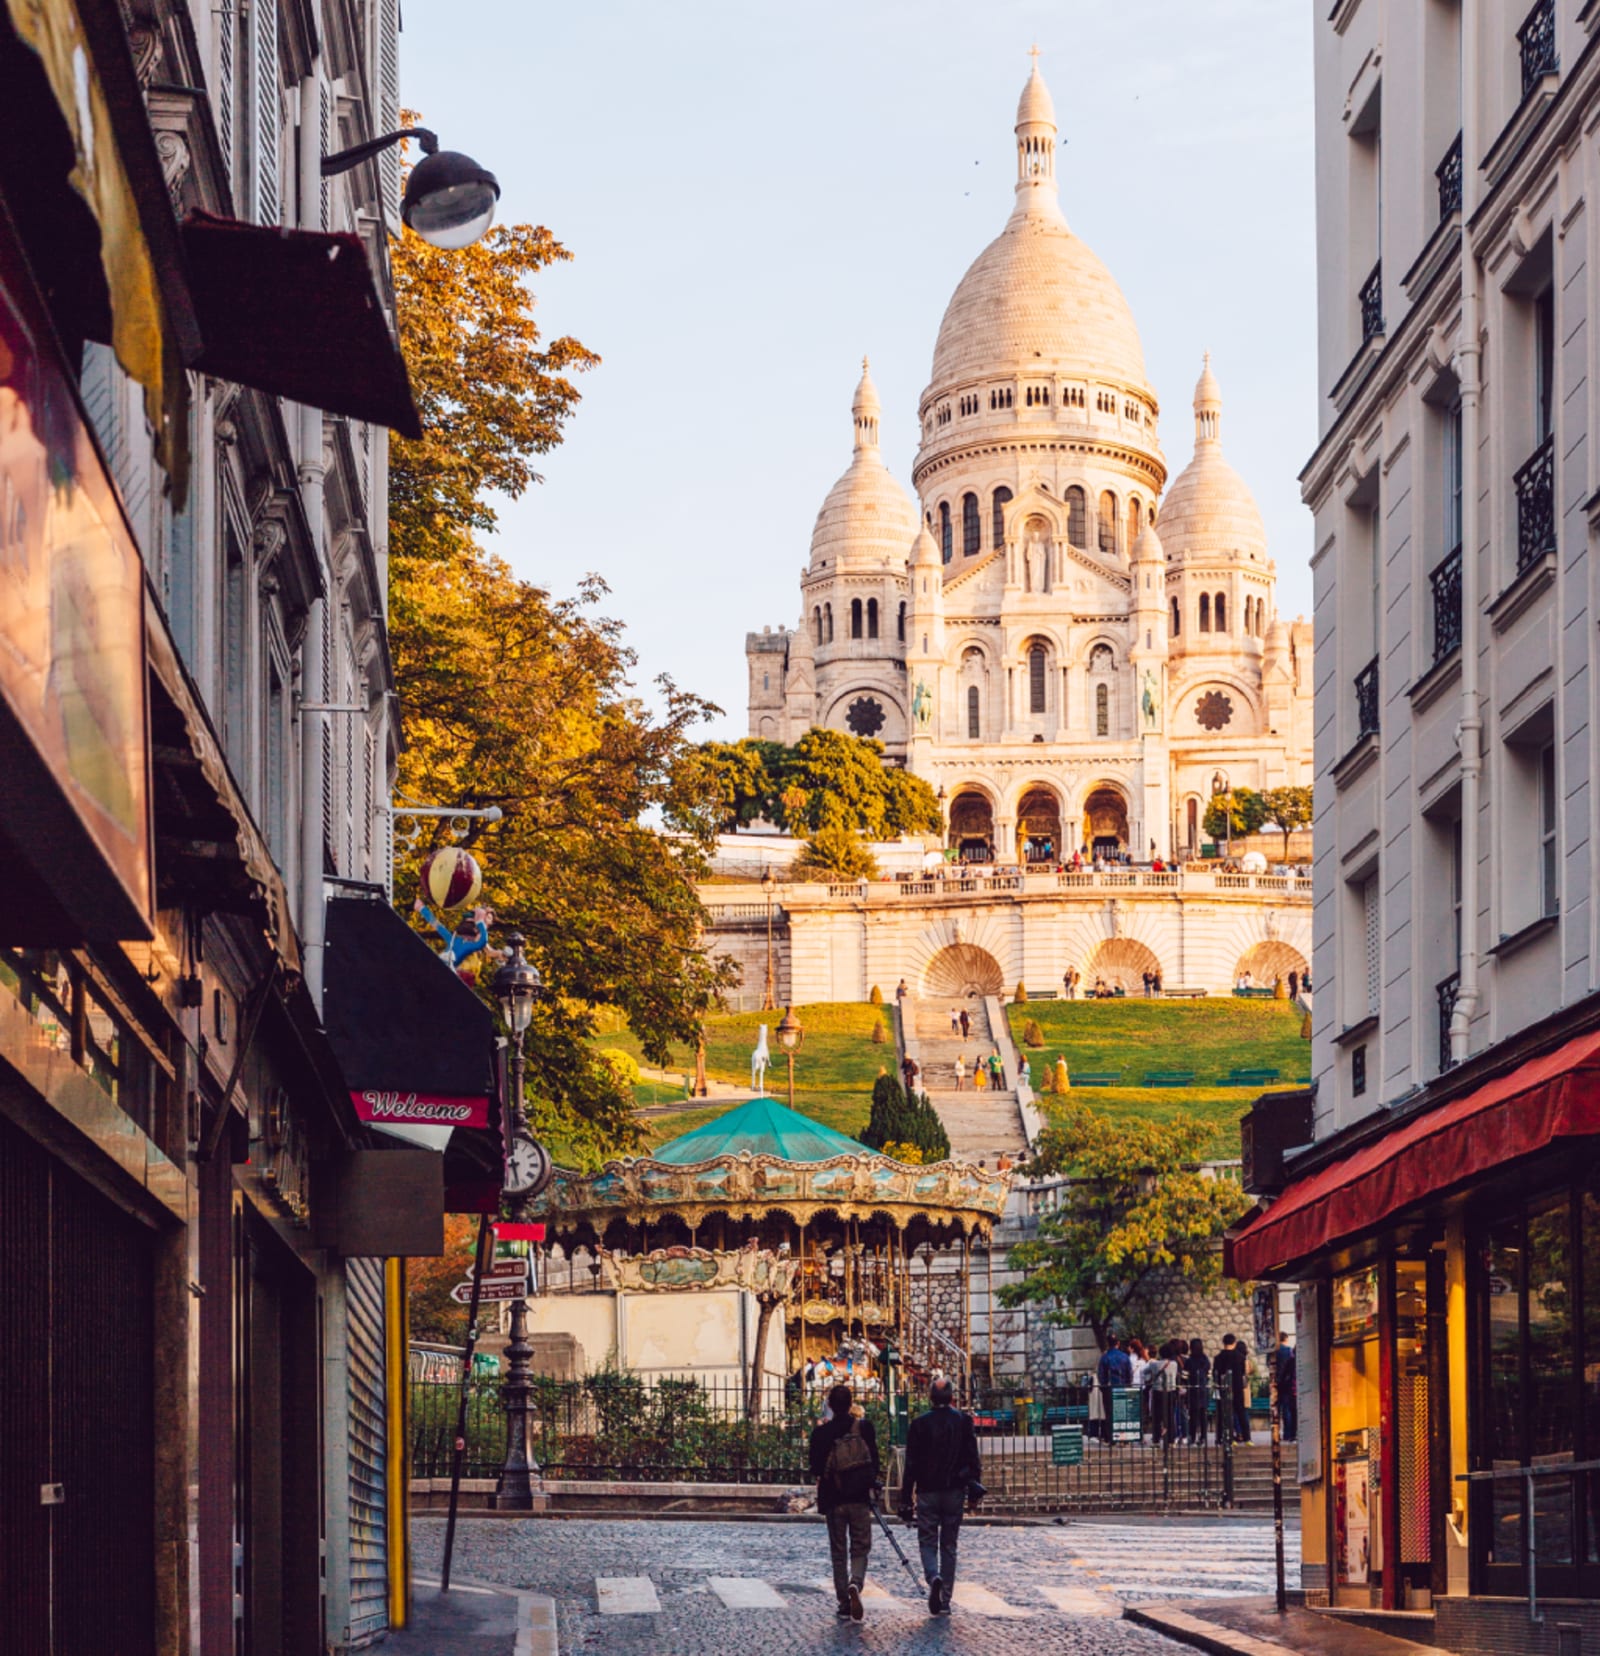 Streets of Montmartre and Sacre-Coeur Basilica on the hill, Paris, France